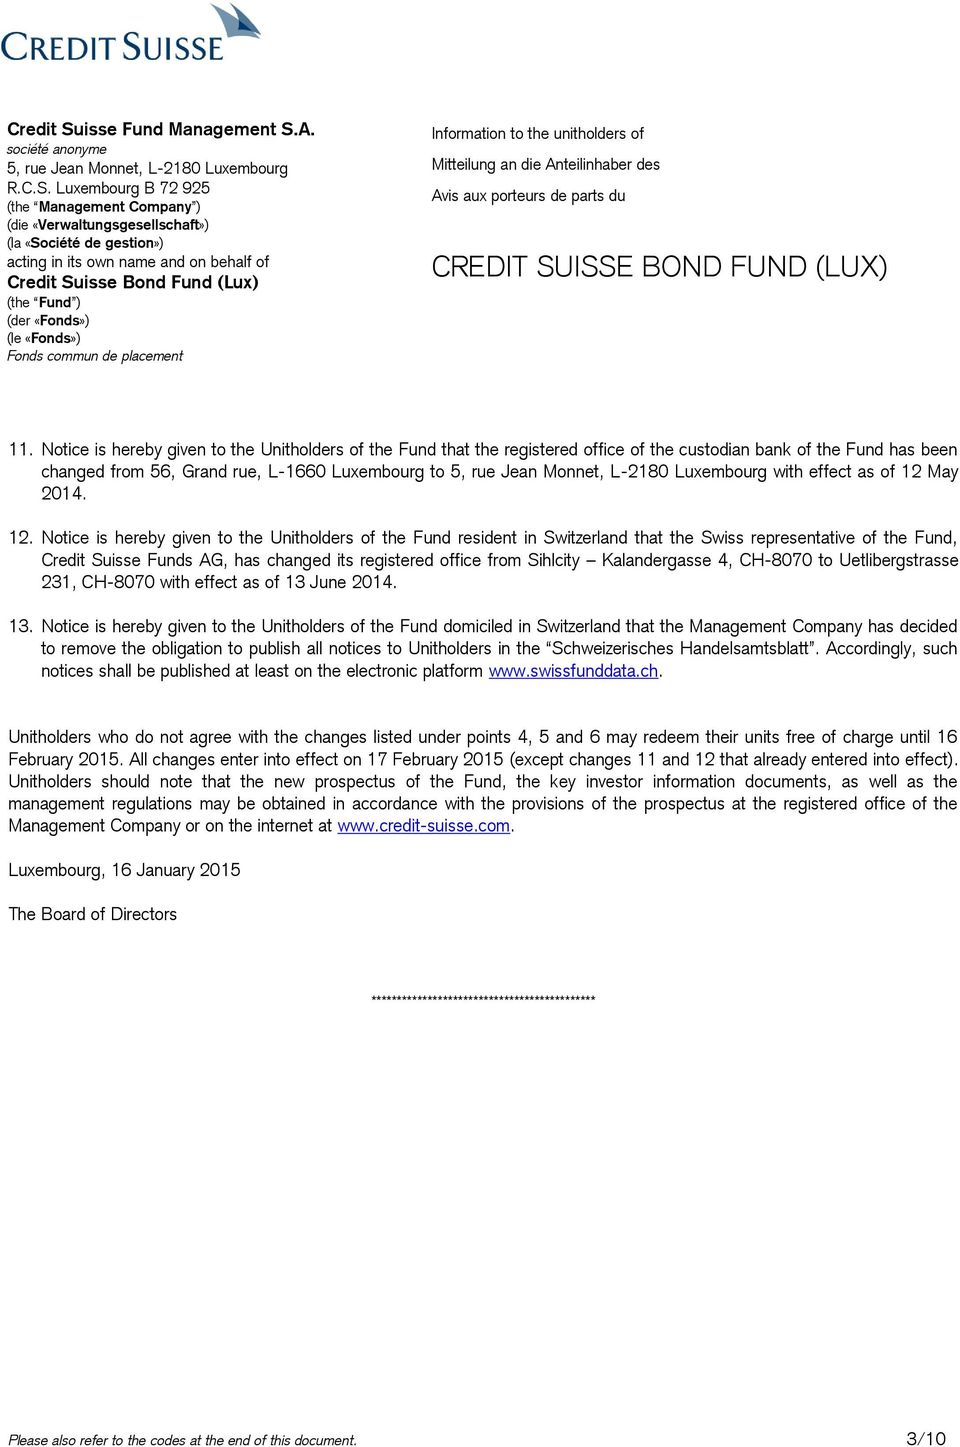 Notice is hereby given to the Unitholders of the Fund resident in Switzerland that the Swiss representative of the Fund, Credit Suisse Funds AG, has changed its registered office from Sihlcity